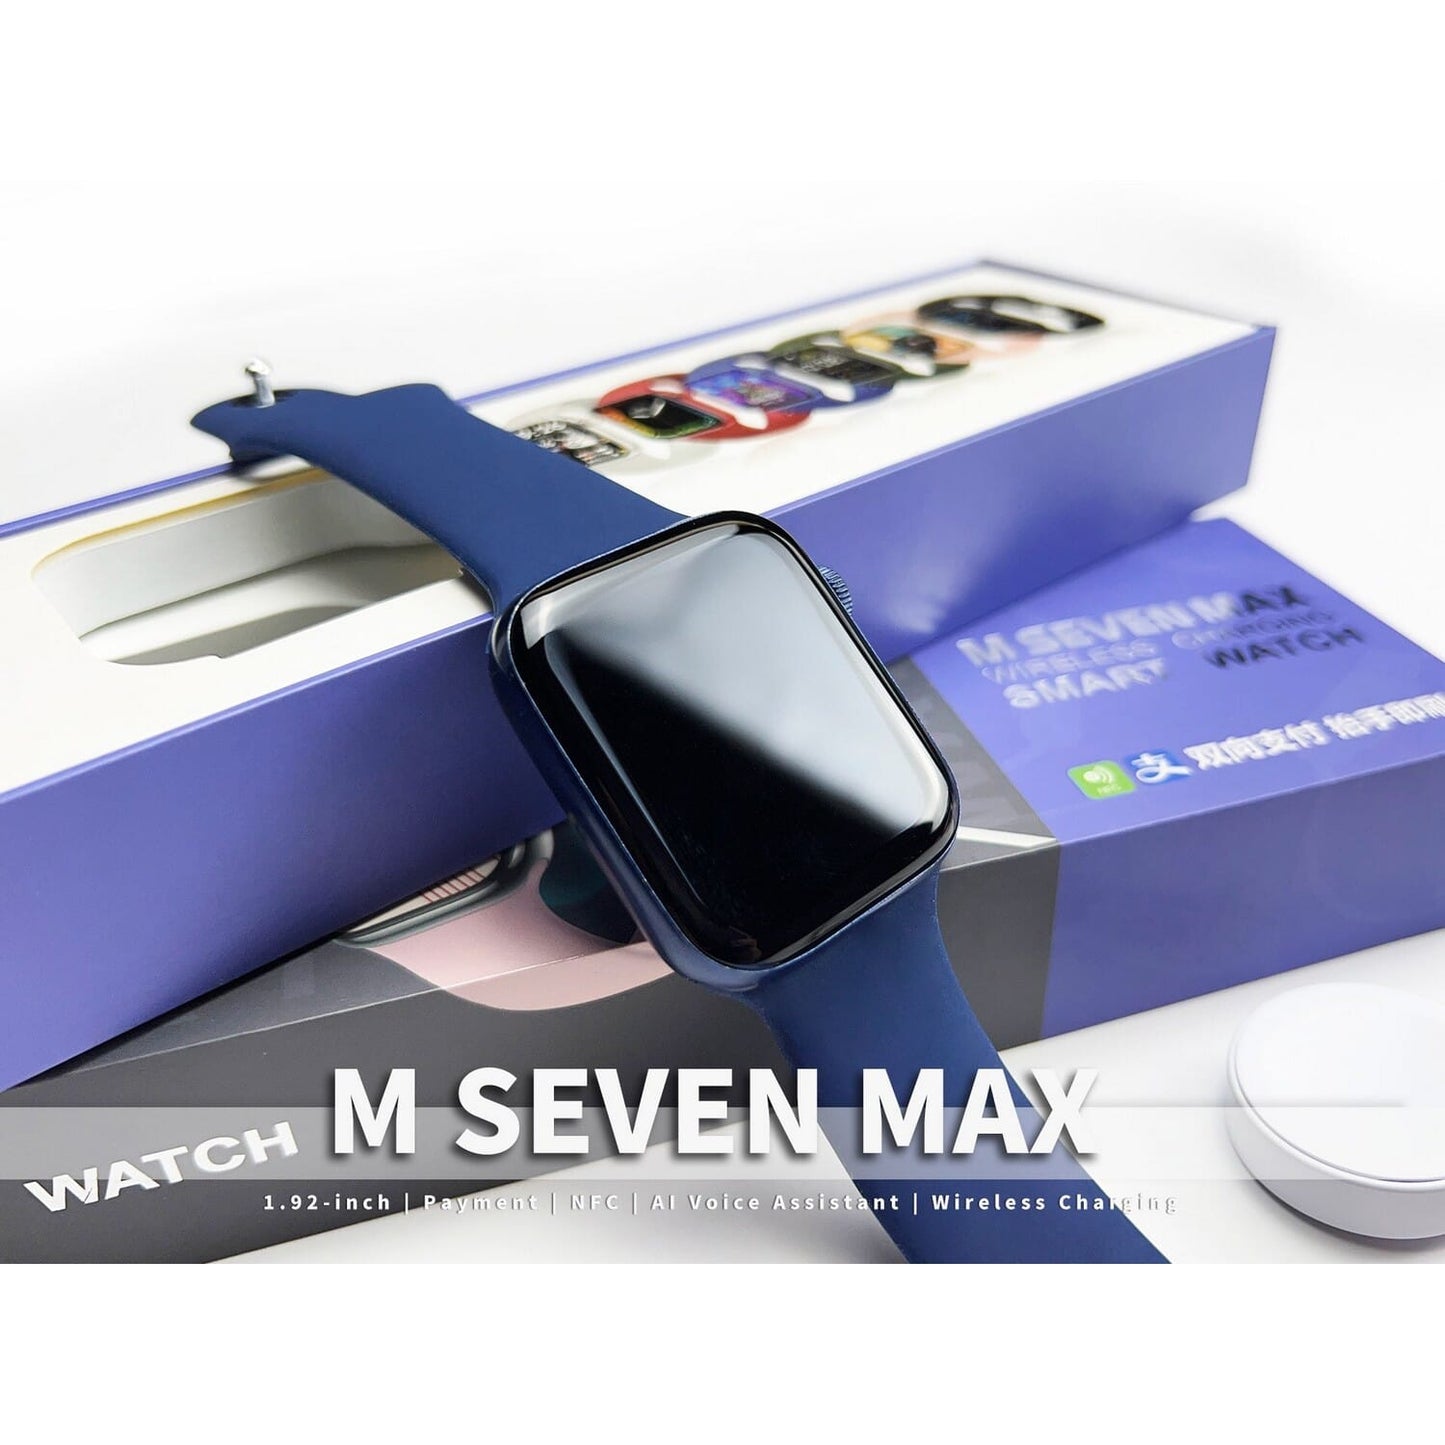 M Seven Max 1.92 inches Full Screen Smartwatch with NFC Wireless Charging Long battery and Long Battery